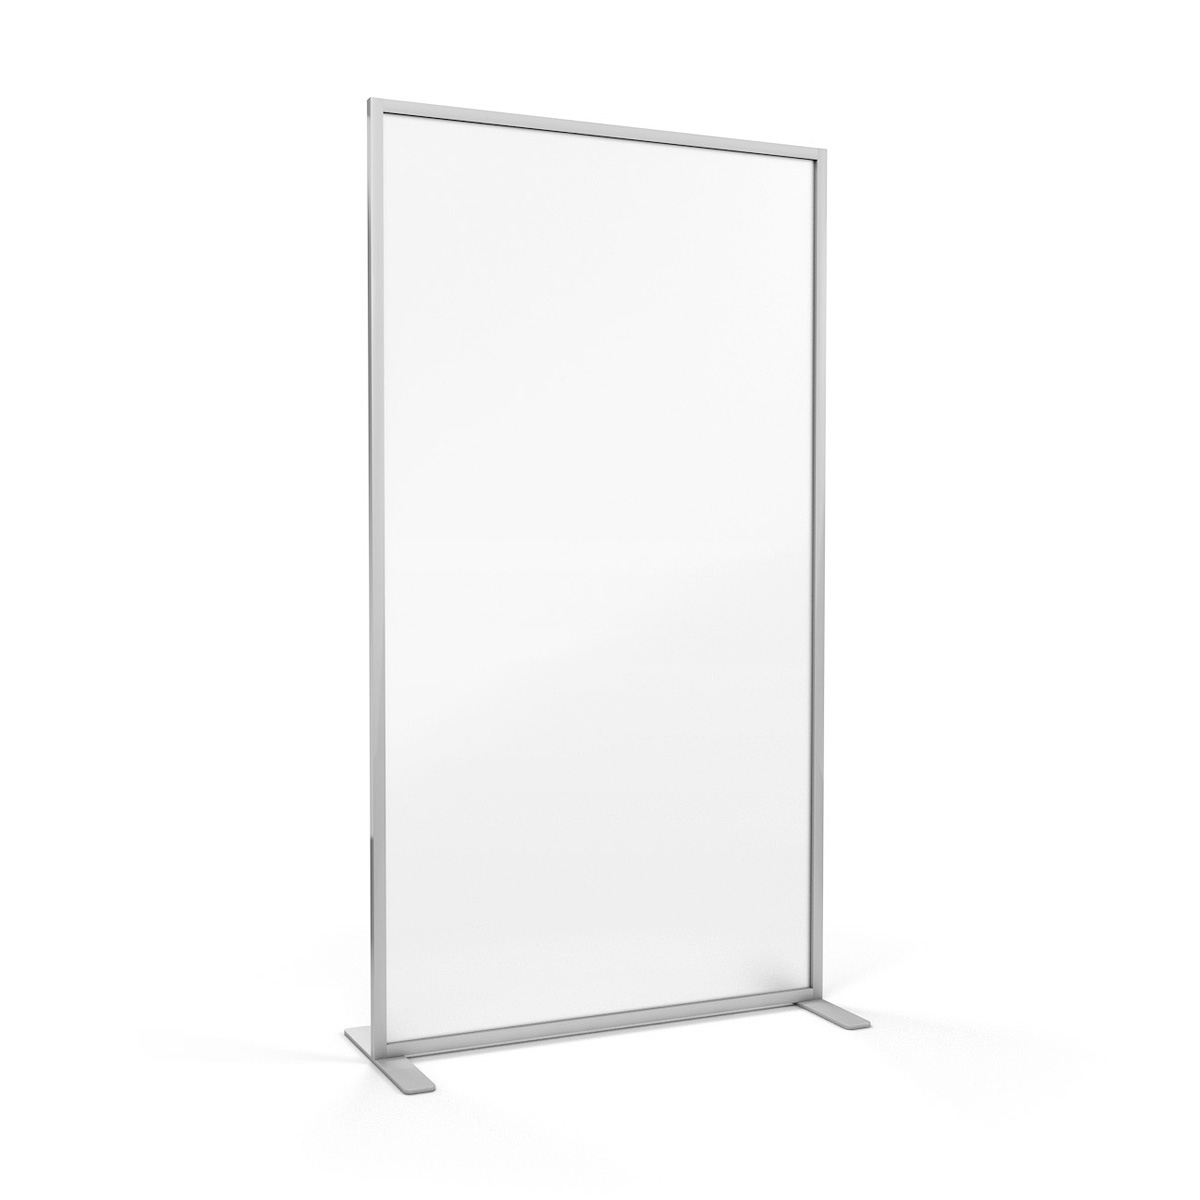 ACHOO® Frosted Perspex® Freestanding Office Screen With Low Profile Stabilising Feet